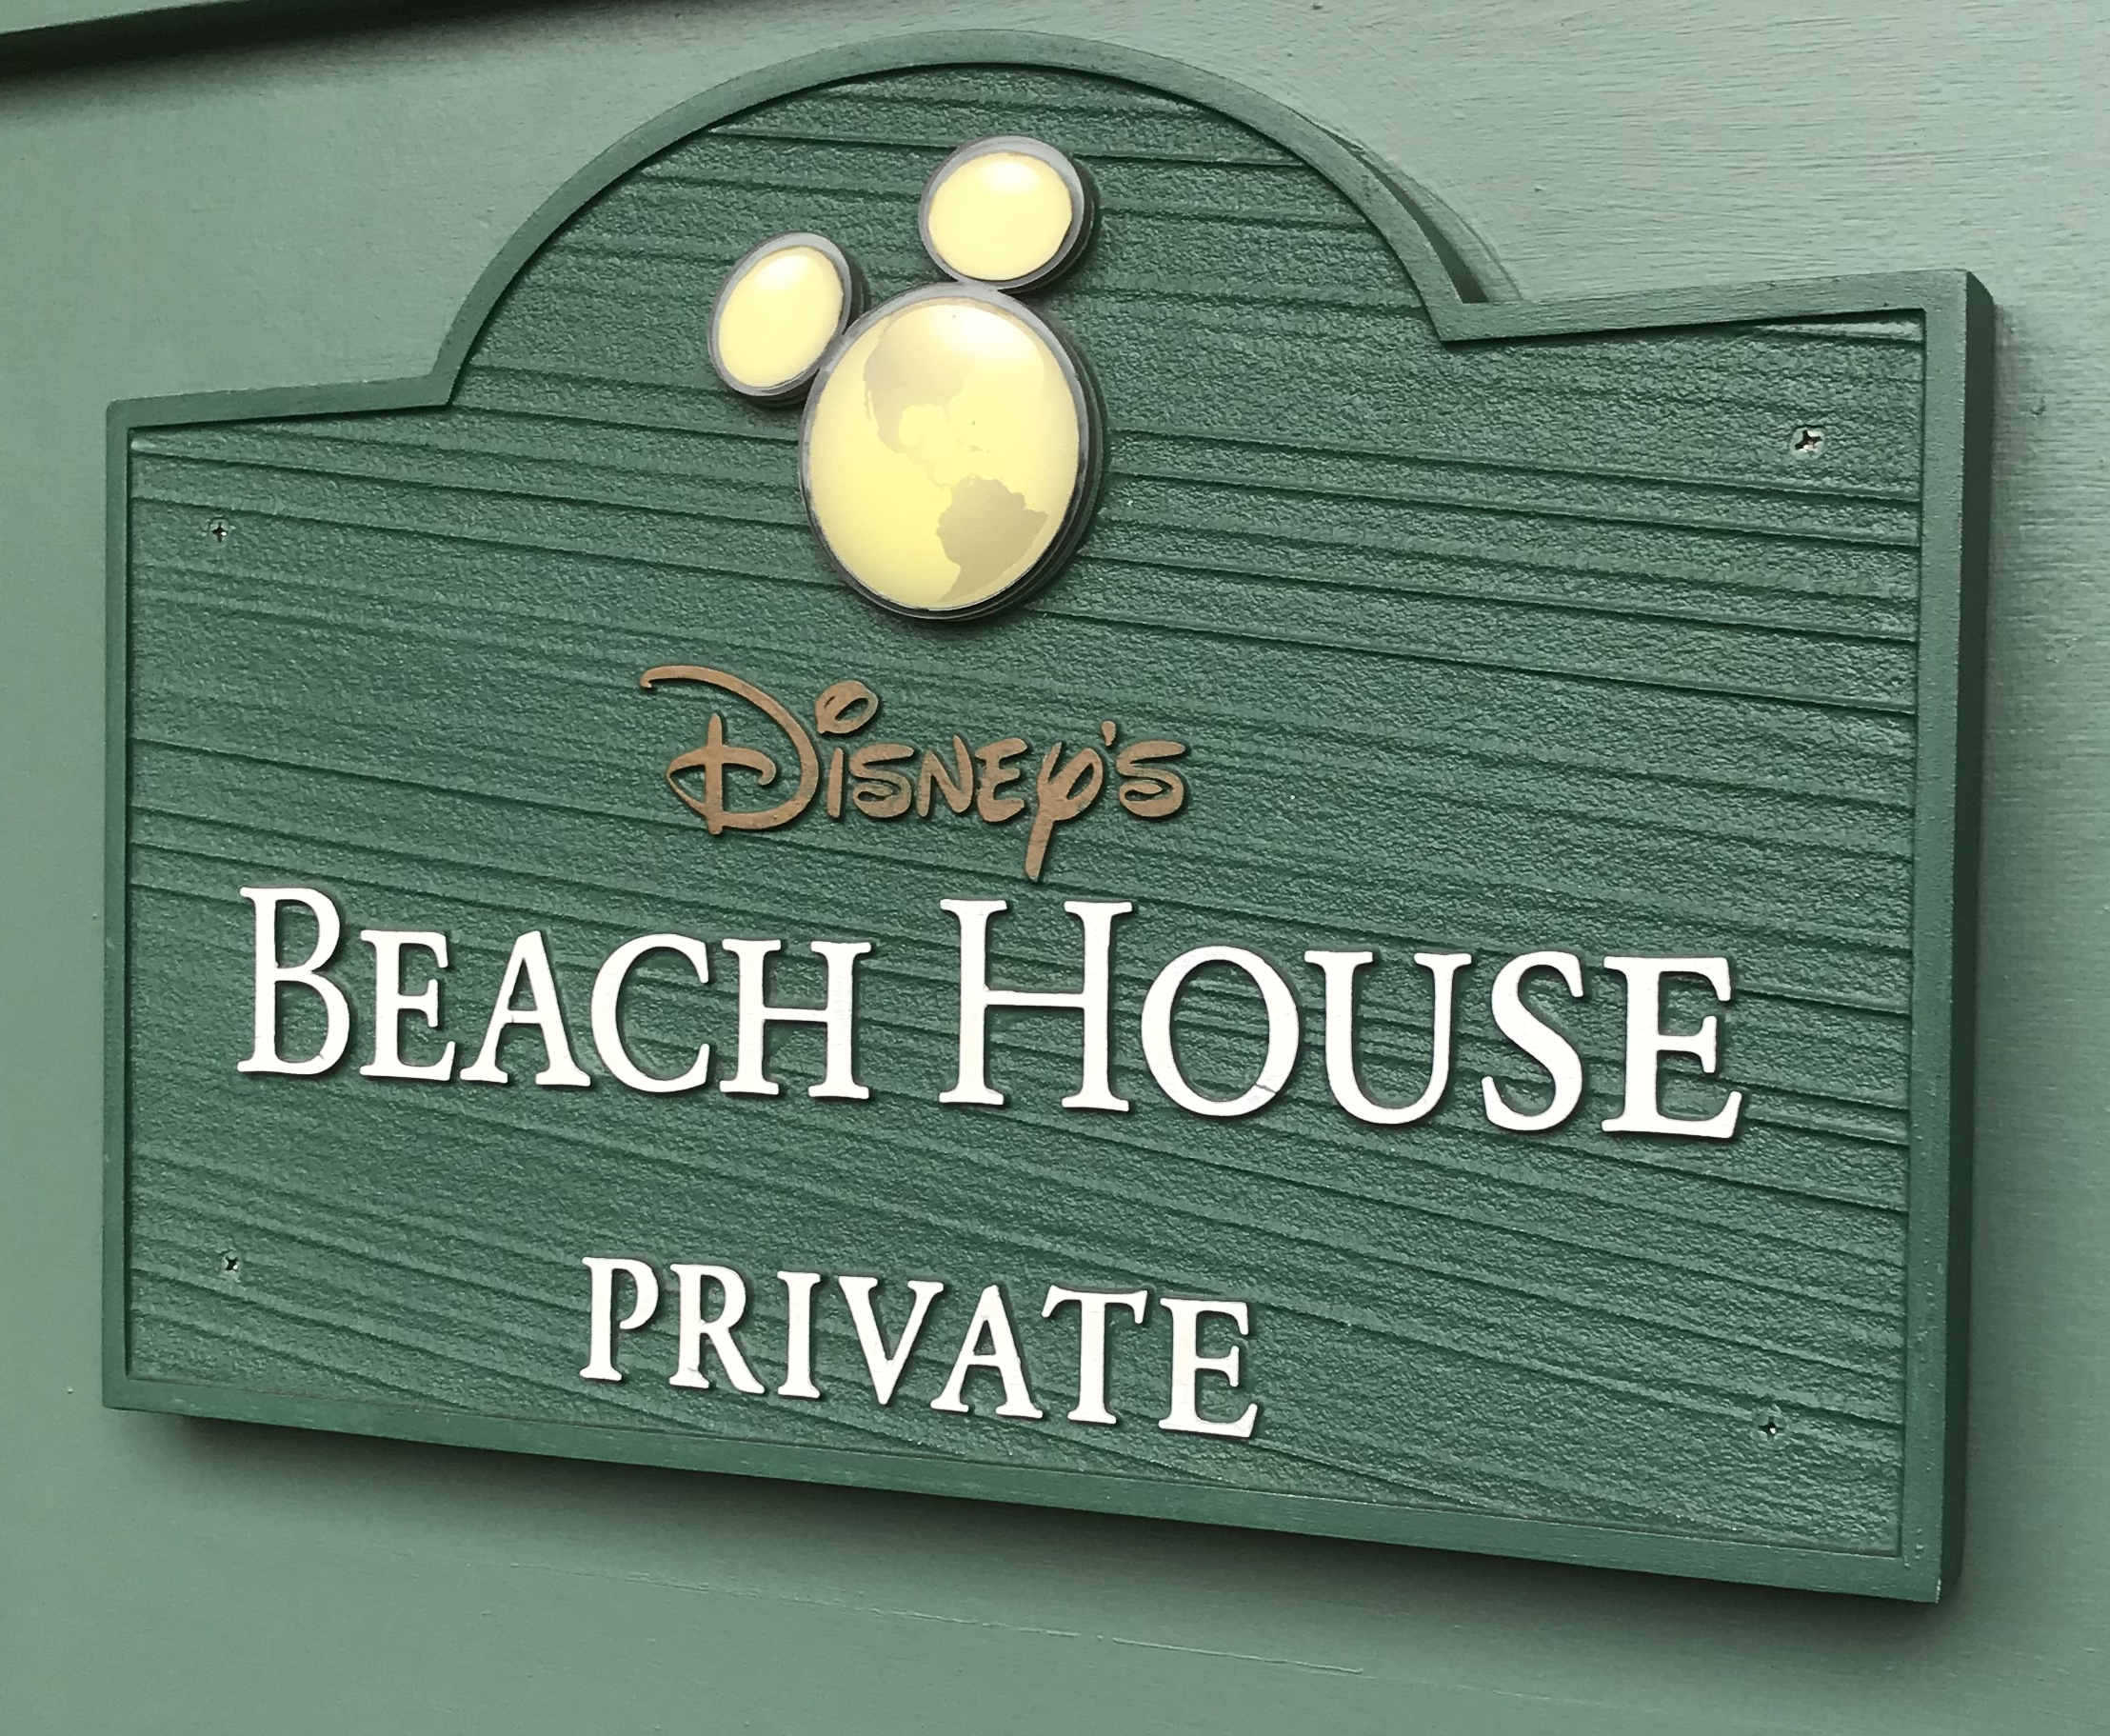 Private Disney Beach House | Small Signage